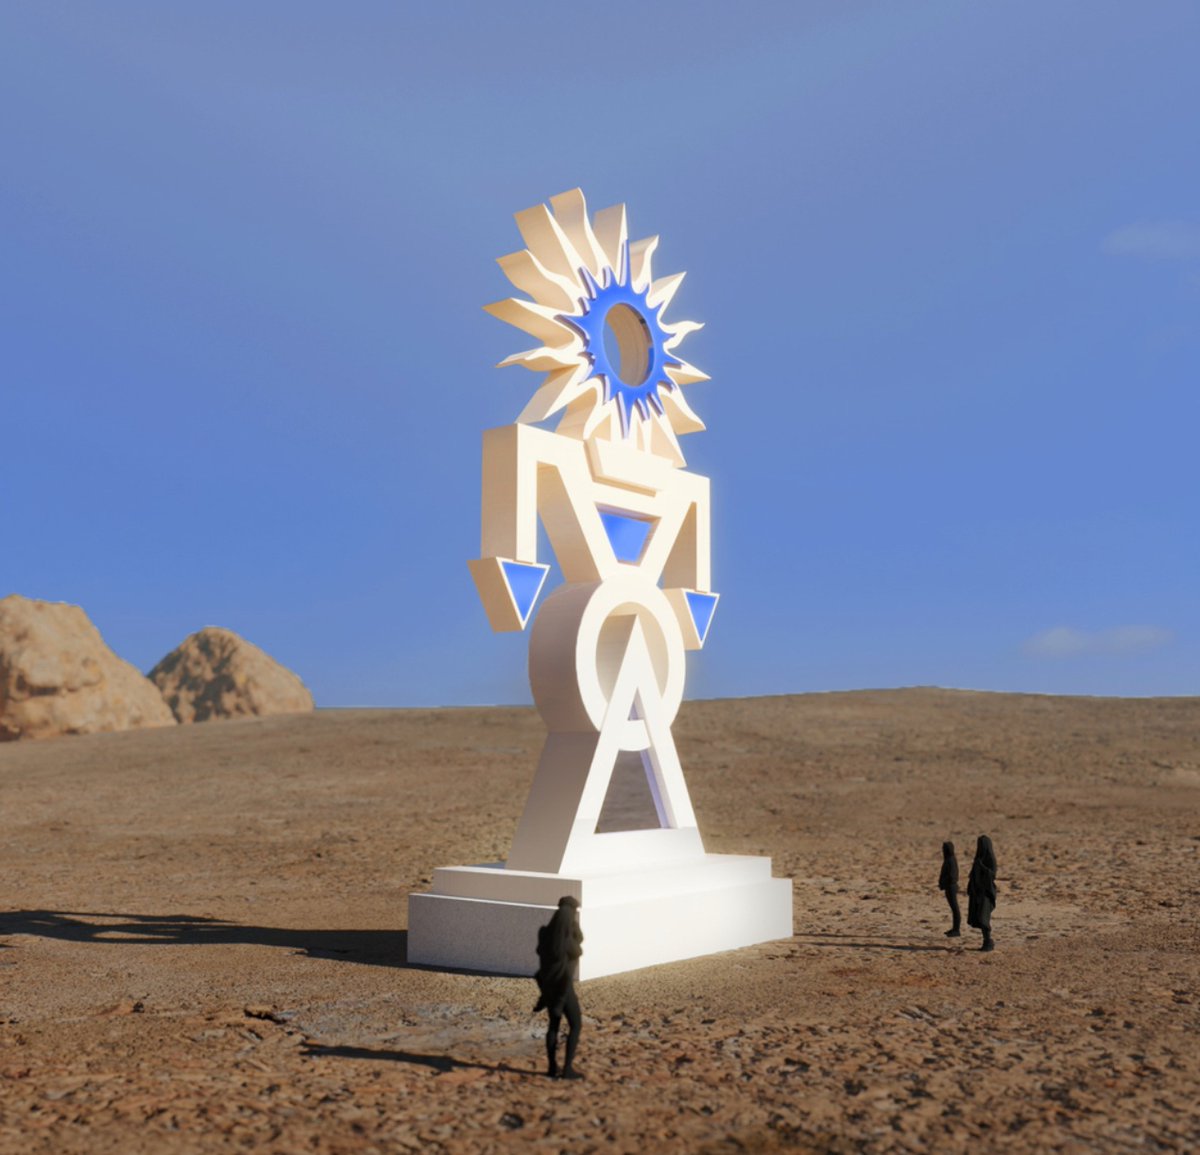 This weekend contemporary artist #LaurenBaker revealed her astonishing 10 metre high totem poles at the famous #BurningMan Festival, California 🧿 The 3 totems; Unity, Lunar and Solar form the Wisdom Totems, which entwine celestial bodies and symbolism. #boxgalleries